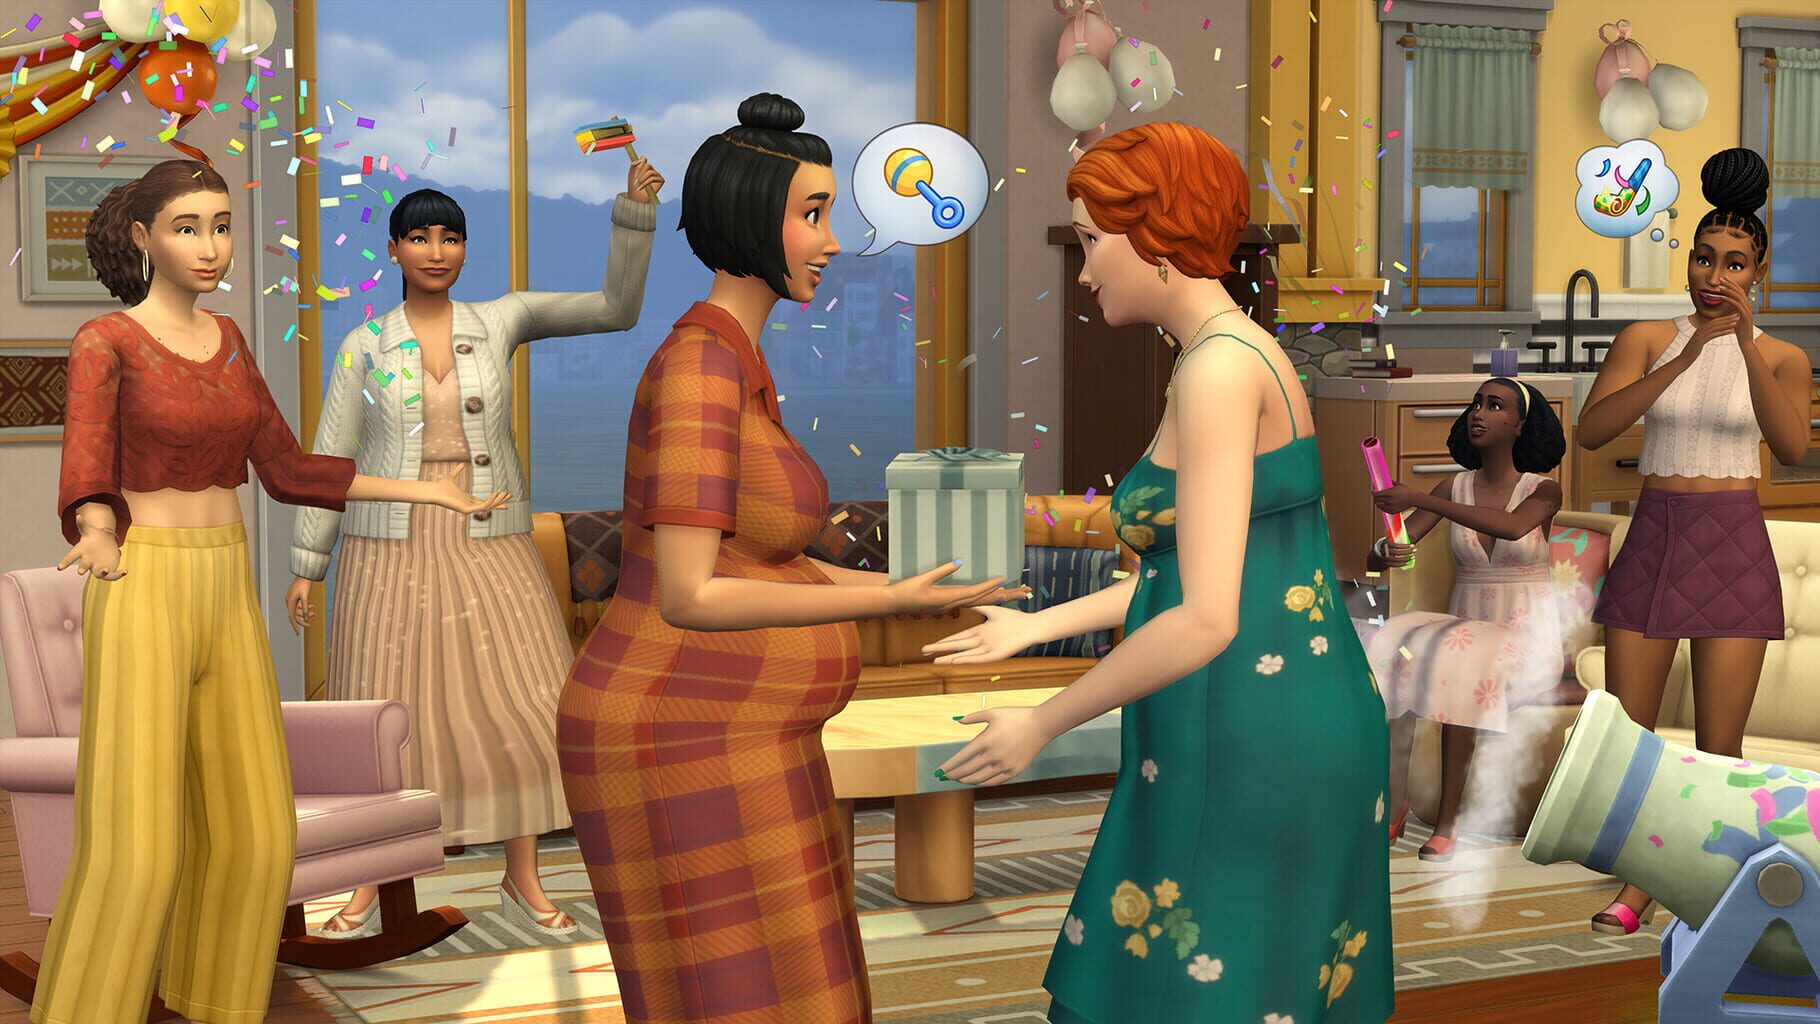 The Sims 4: Growing Together Image